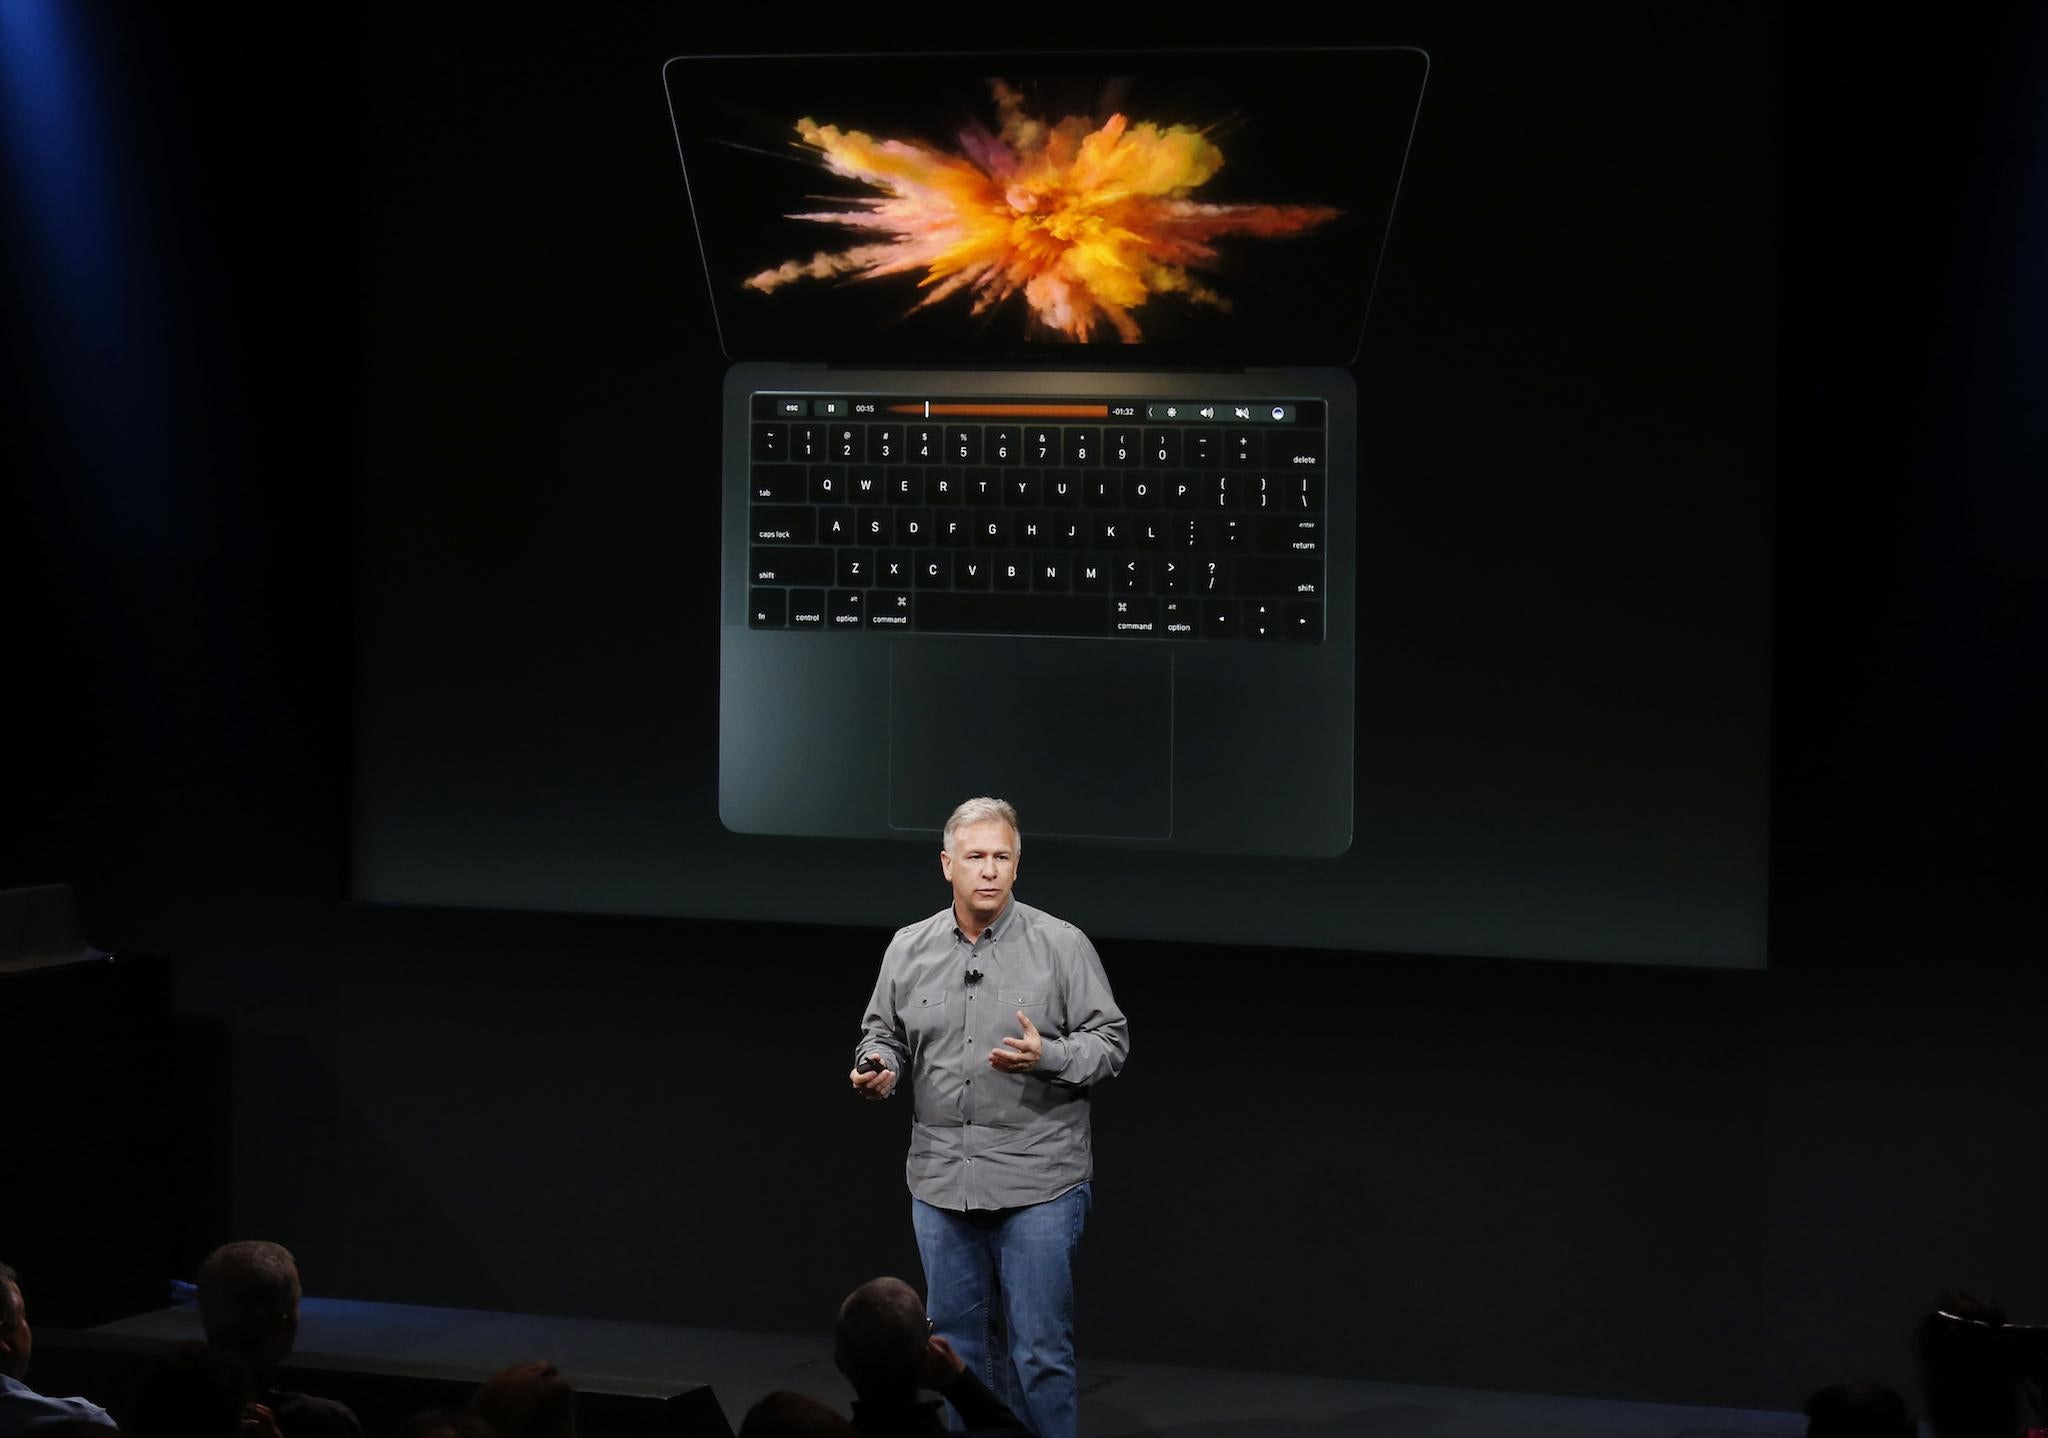 Phil Schiller, senior vice president of worldwide marketing at Apple, speaks under a graphic of a new MacBook Pro during an Apple media event in Cupertino, California, U.S. October 27, 2016